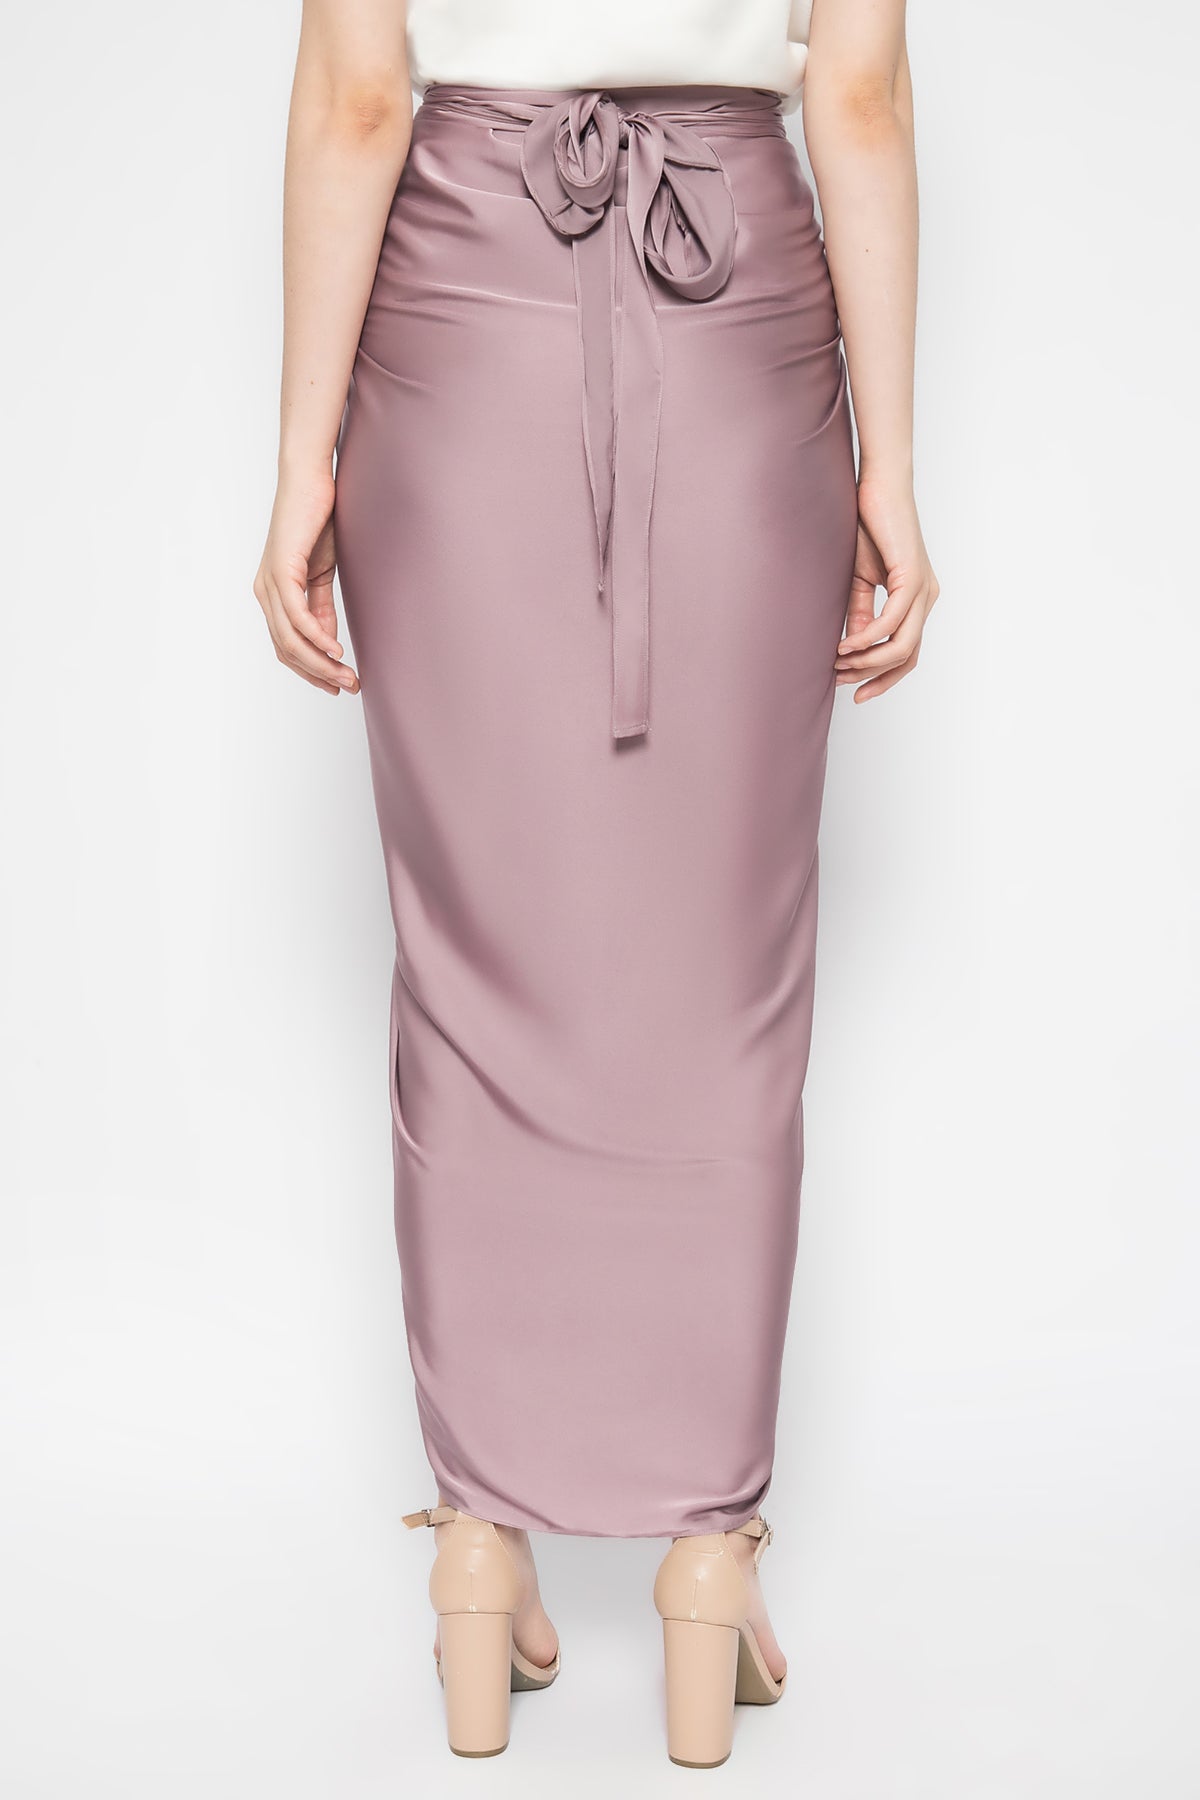 Aisyah Lilit Skirt in Lilac